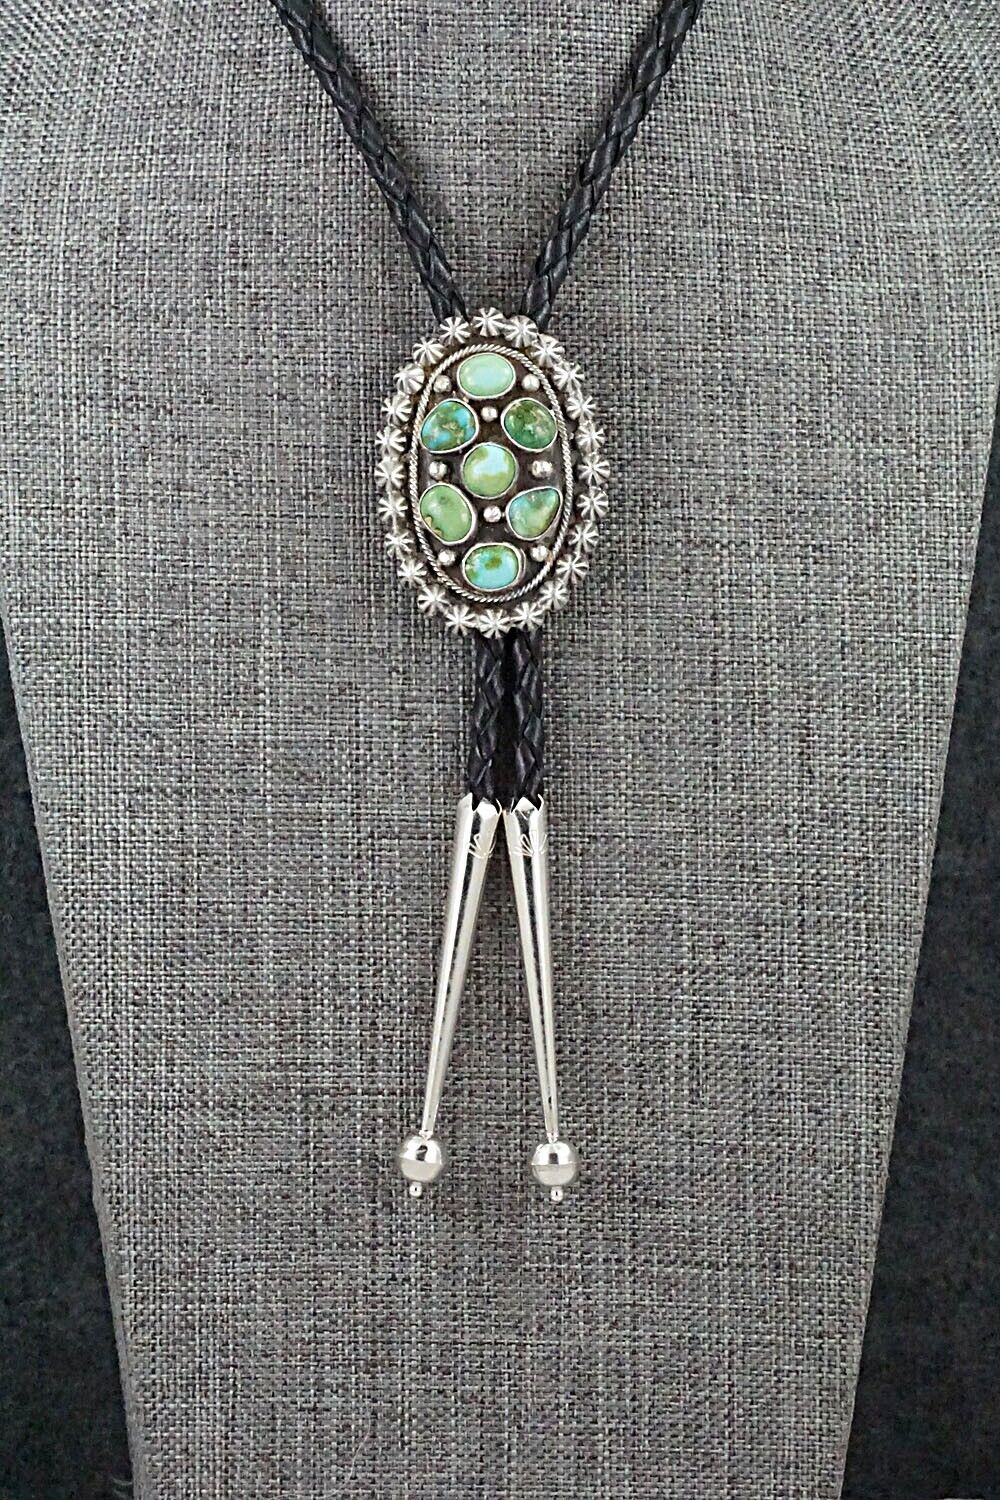 Turquoise & Sterling Silver Bolo Tie - Paige Gordon